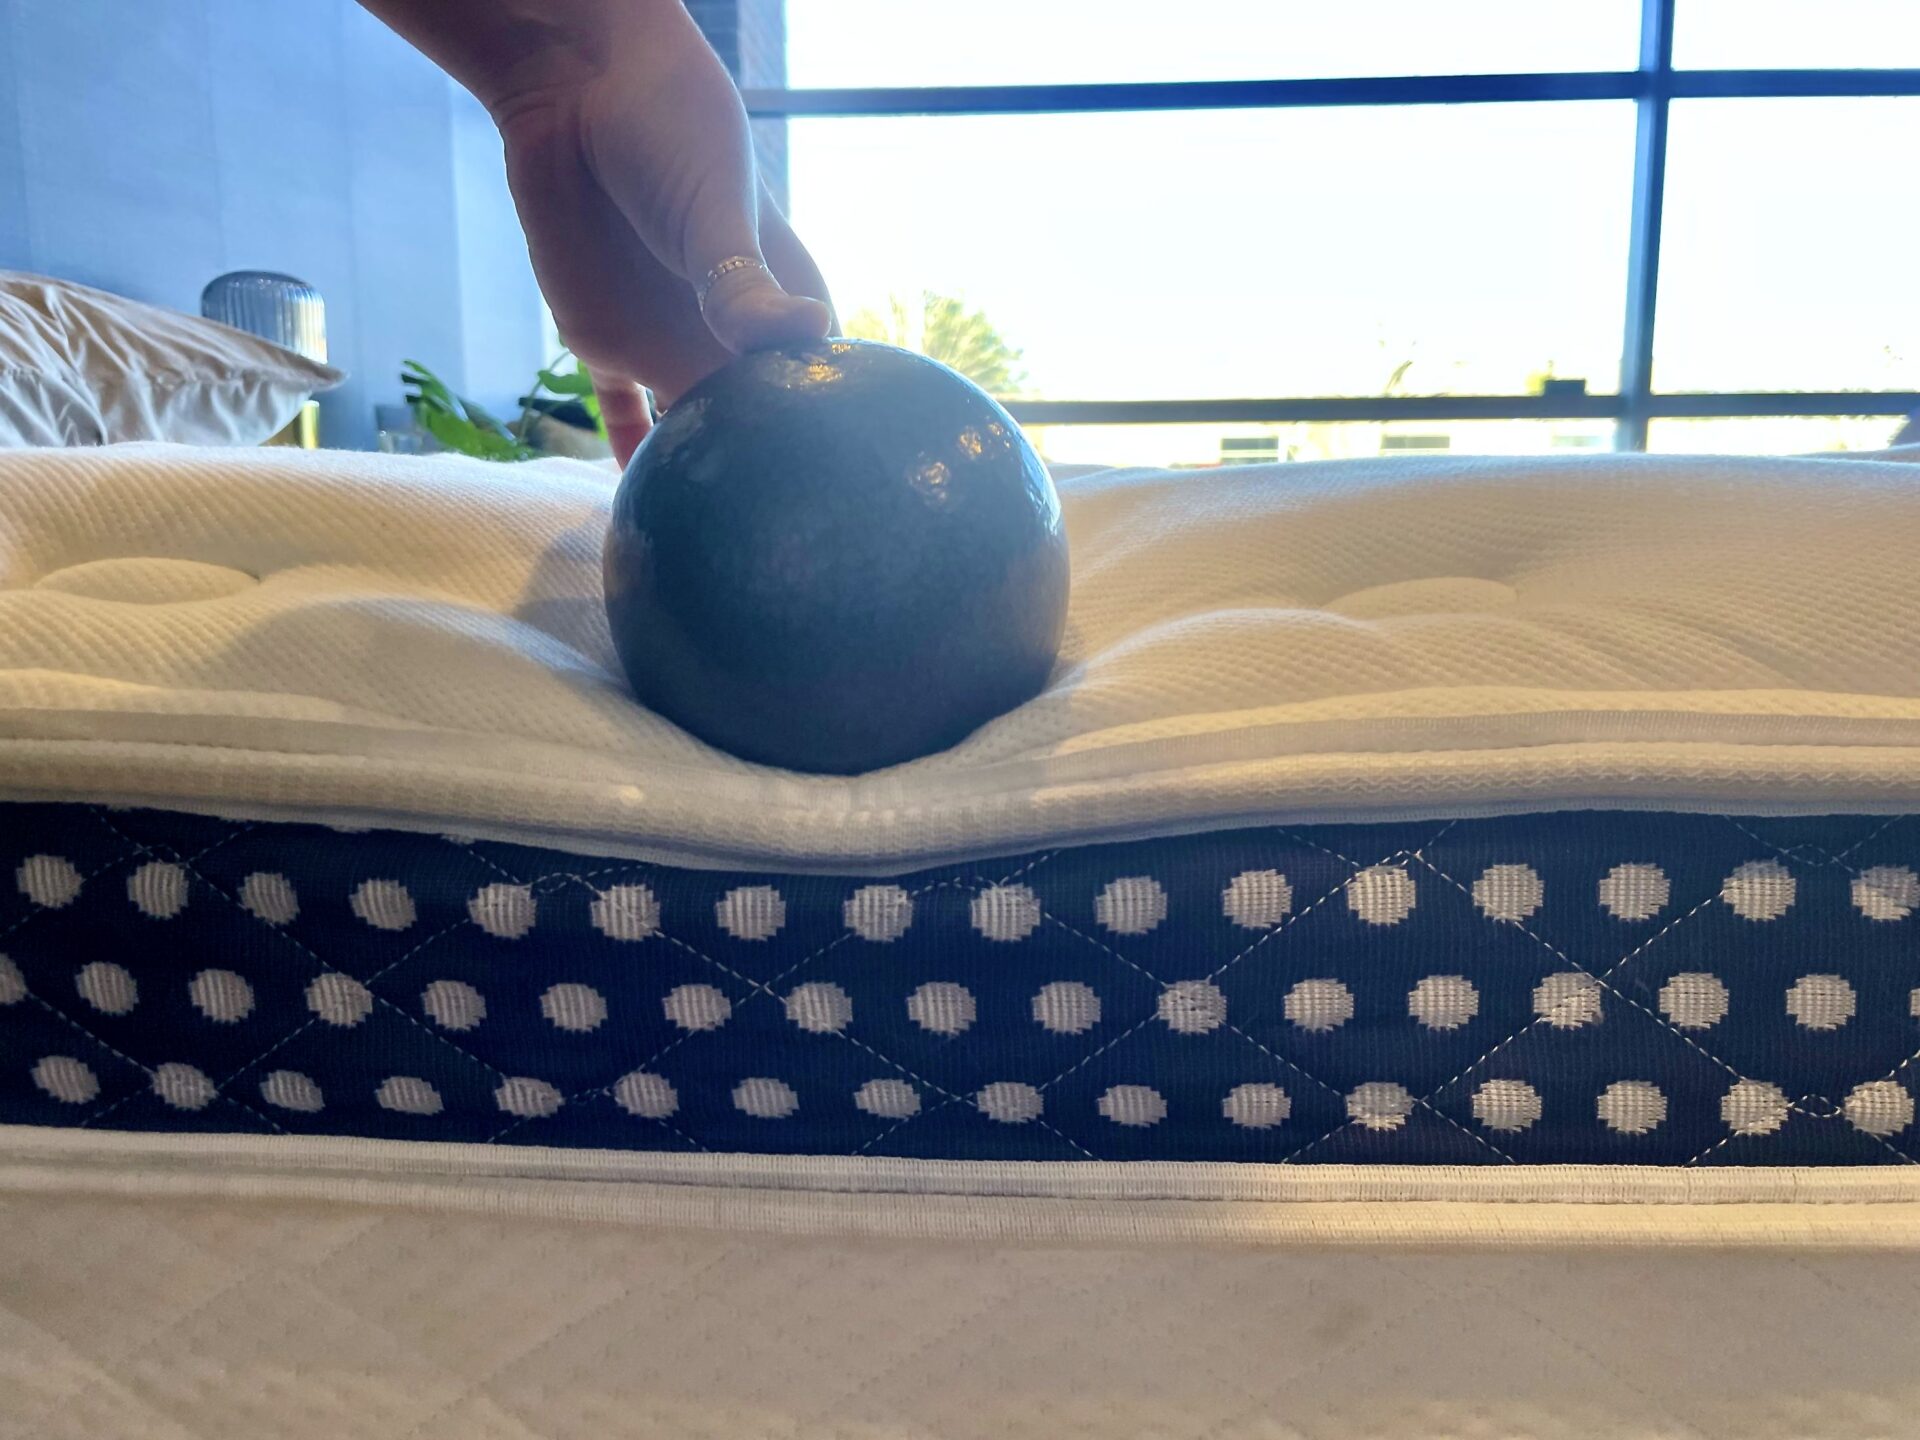 Weighted ball being used to test the edge firmness of a WinkBed mattress